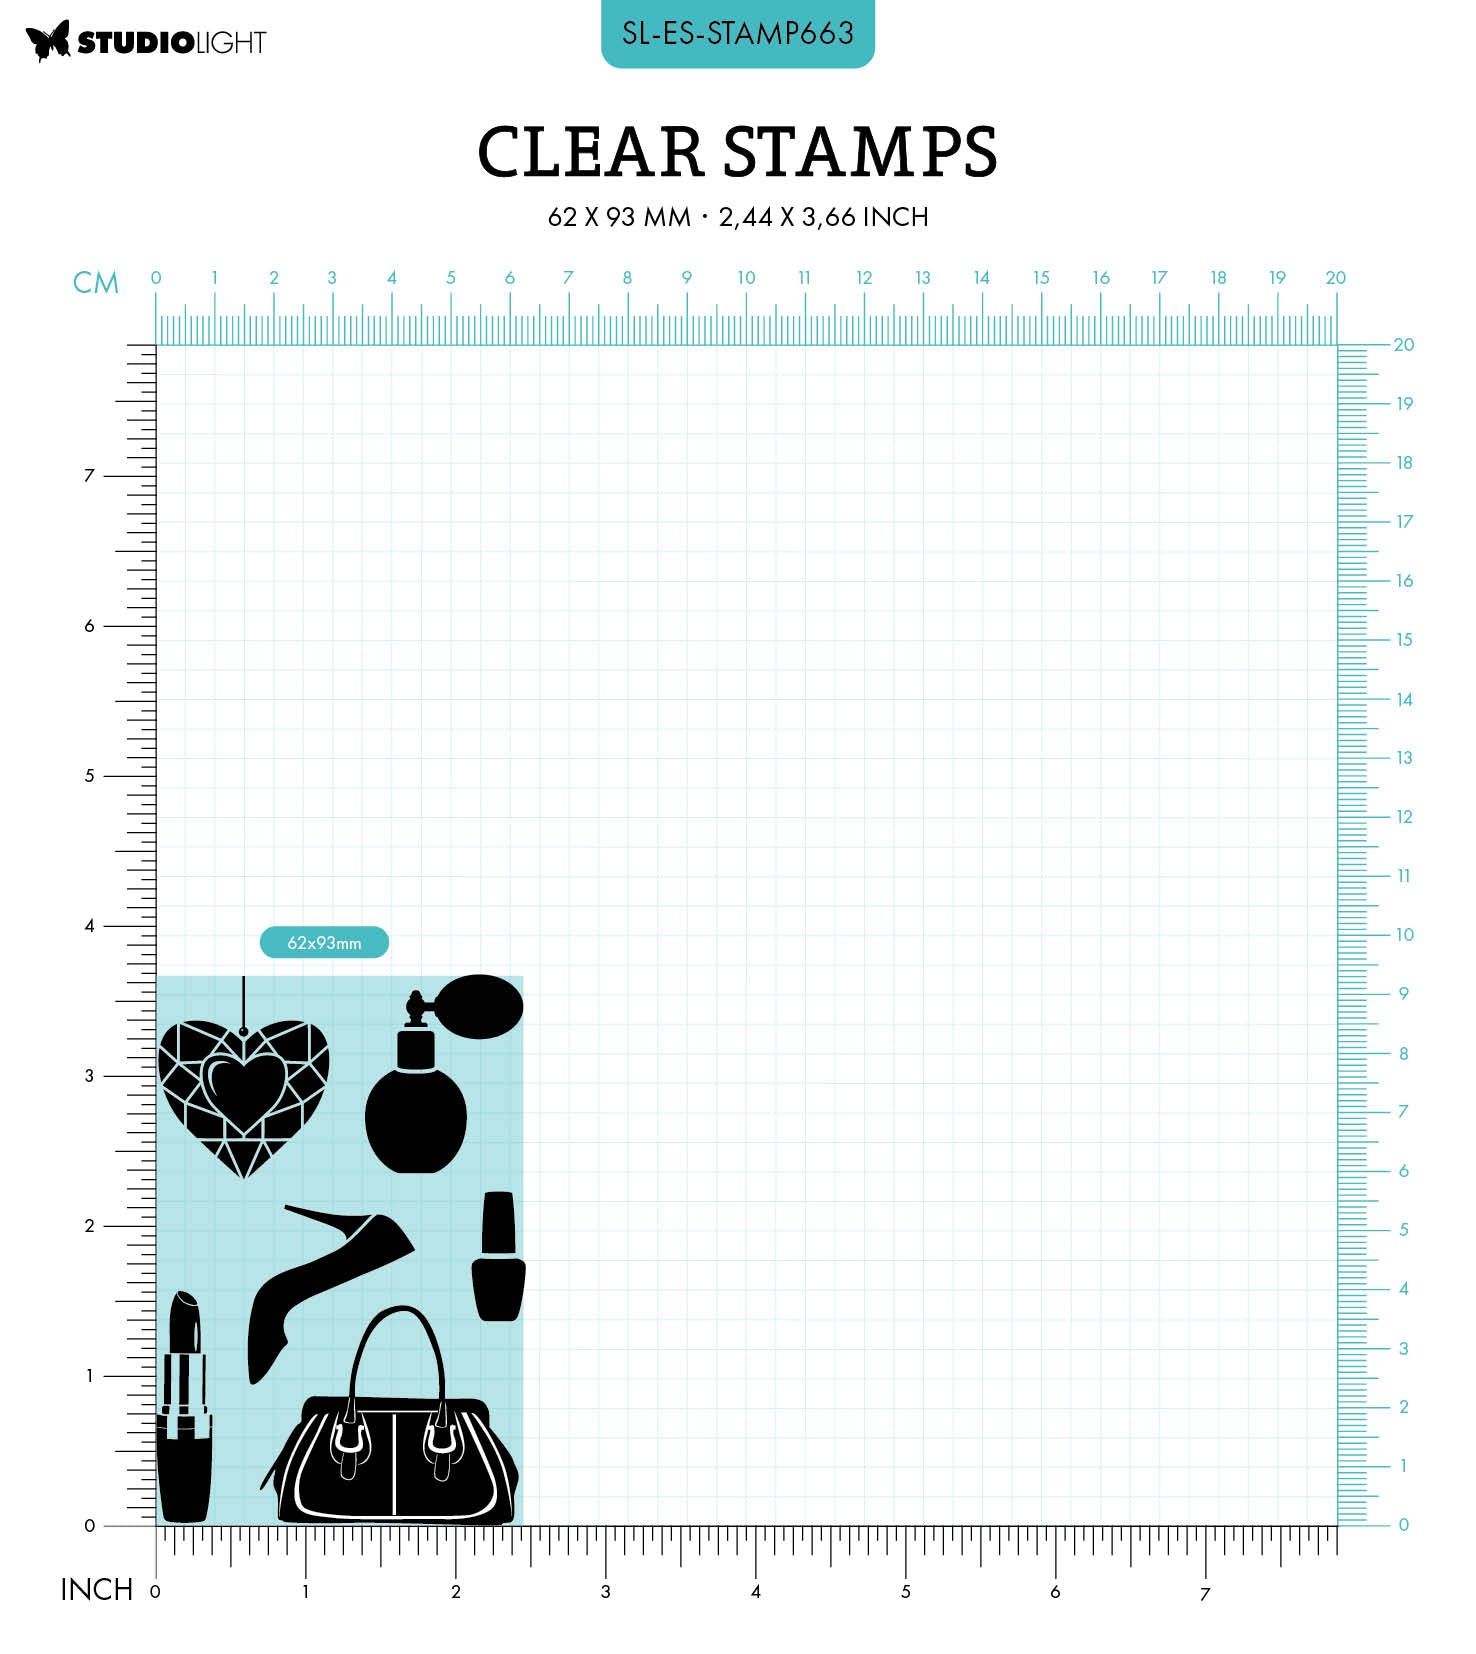 SL Clear Stamp Gifts For Her Essentials 6 PC